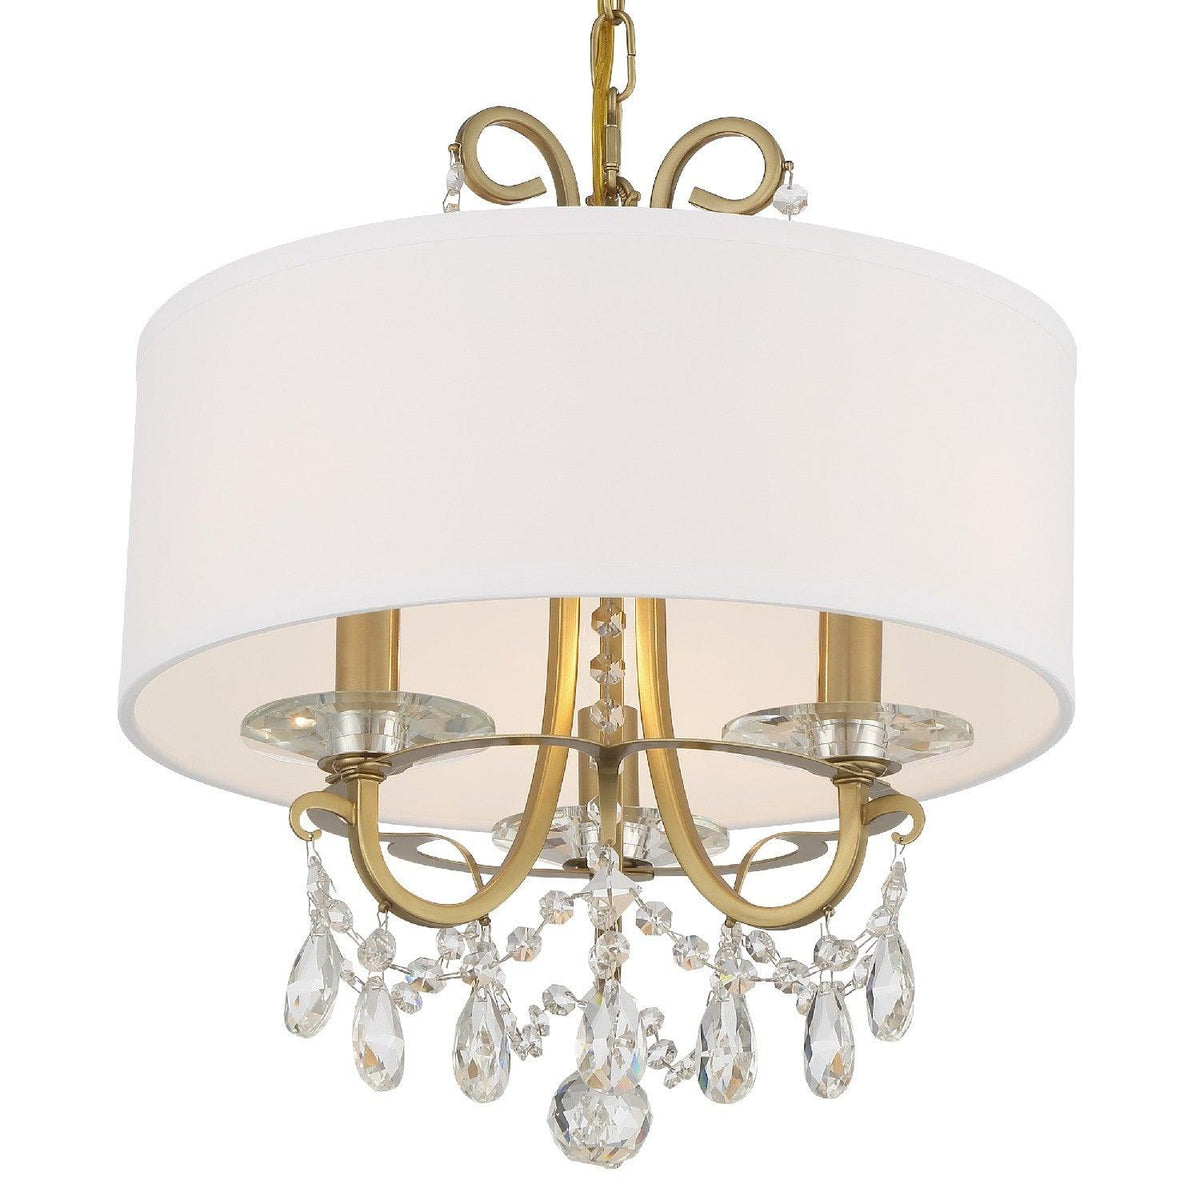 Crystorama - Othello Drum Shade Chandelier - 6623-VG-CL-MWP | Montreal Lighting & Hardware